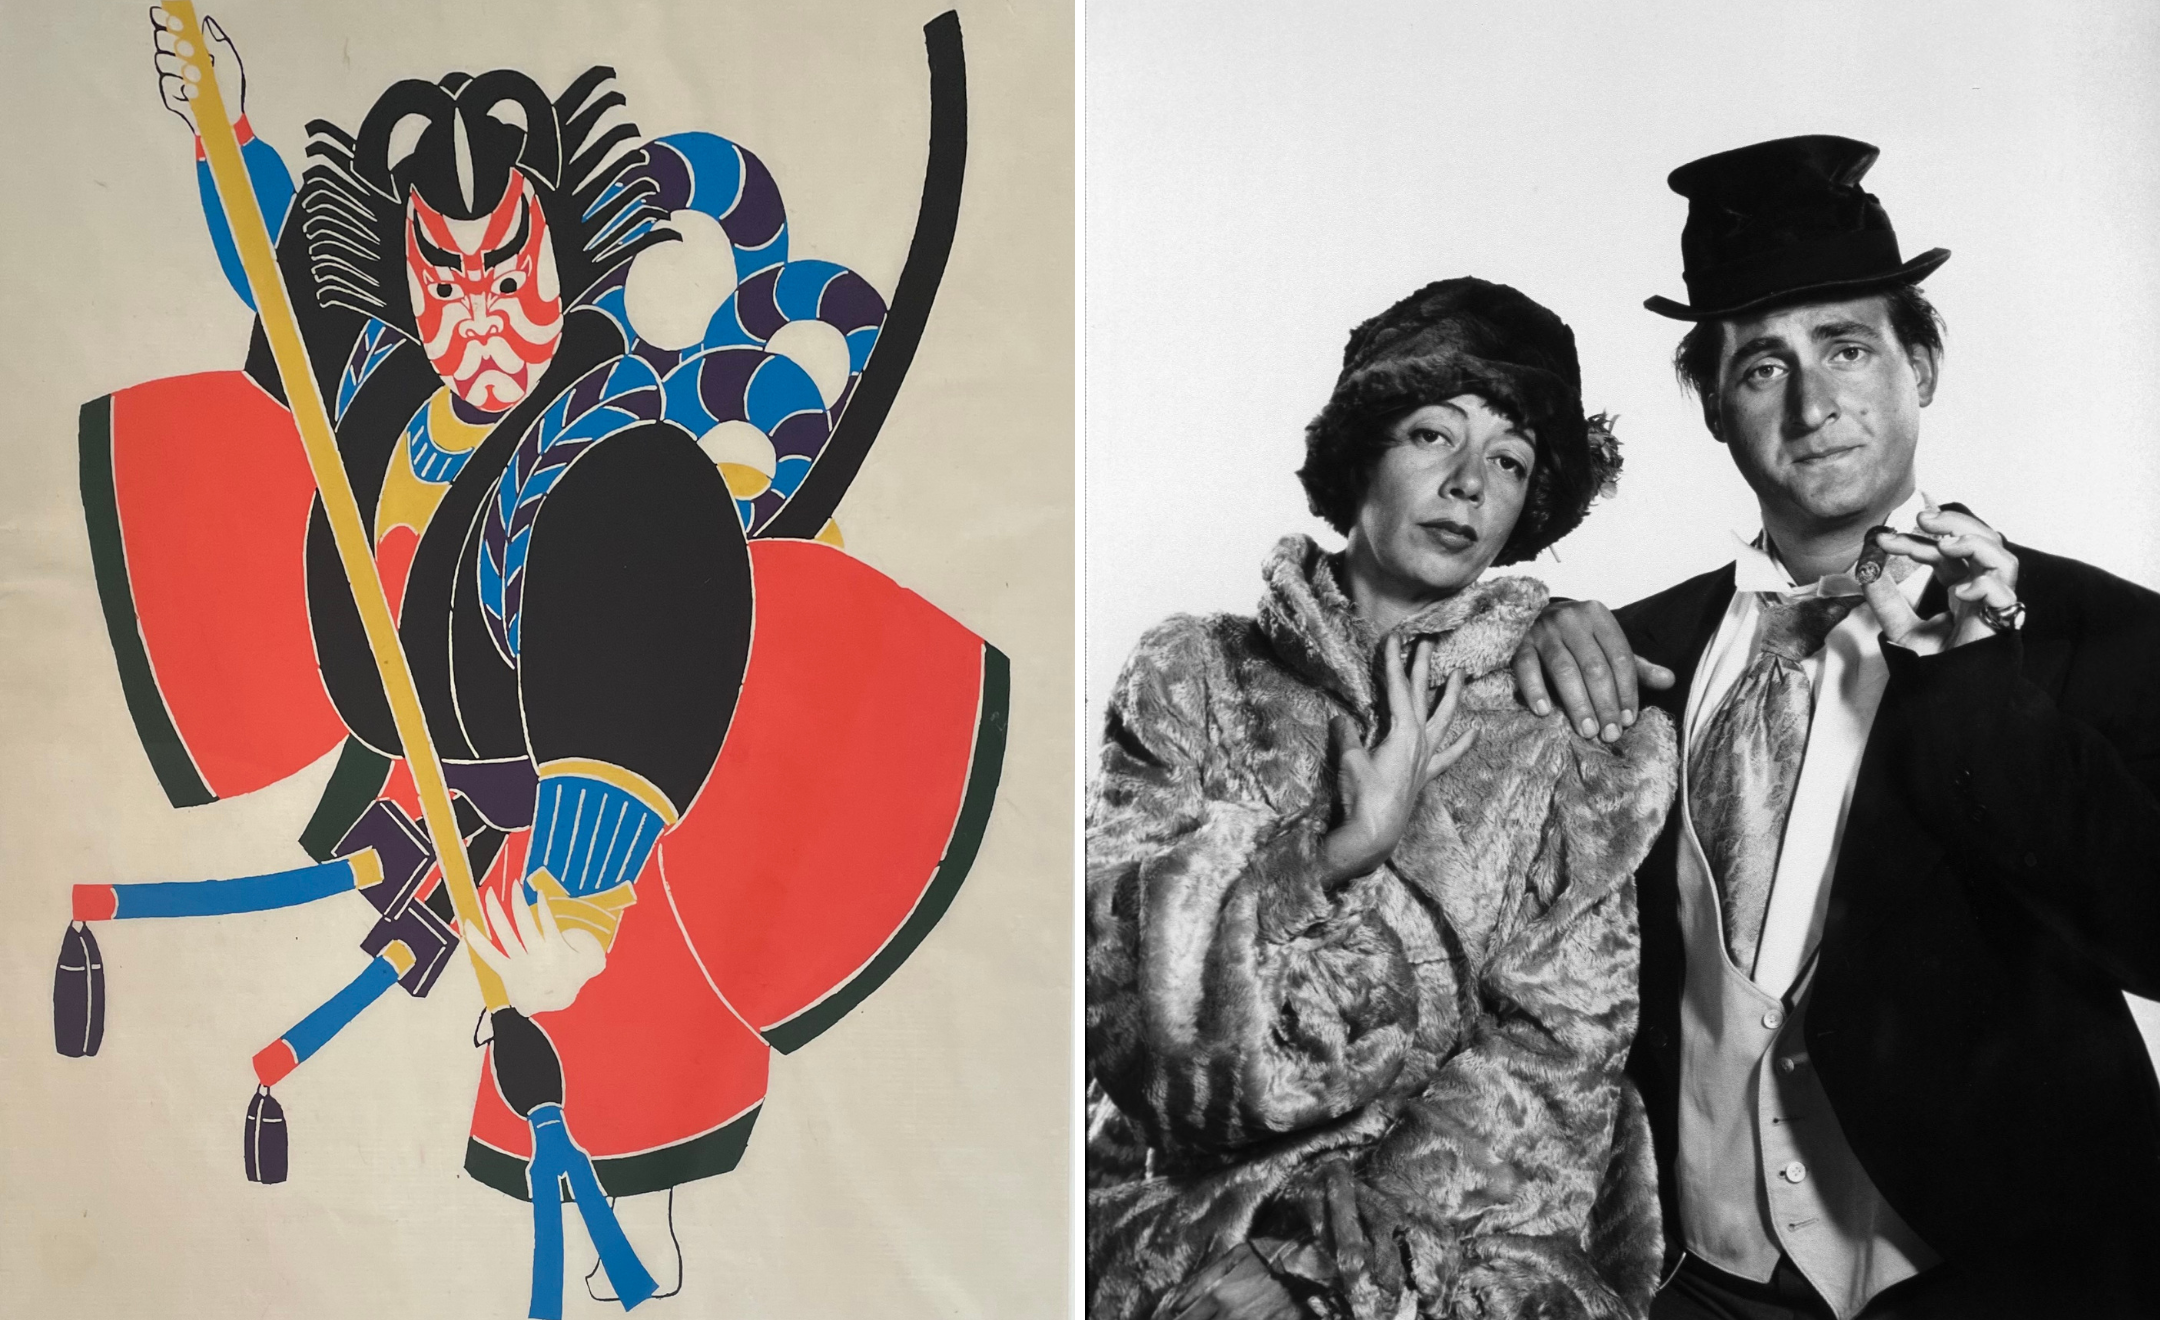 Pictured (L to R): Yanone C by Hiromitsu Takahashi and Sid Caesar and Imogene Coca, Your Show of Shows by Victor Keppler, courtesy WestPAC.